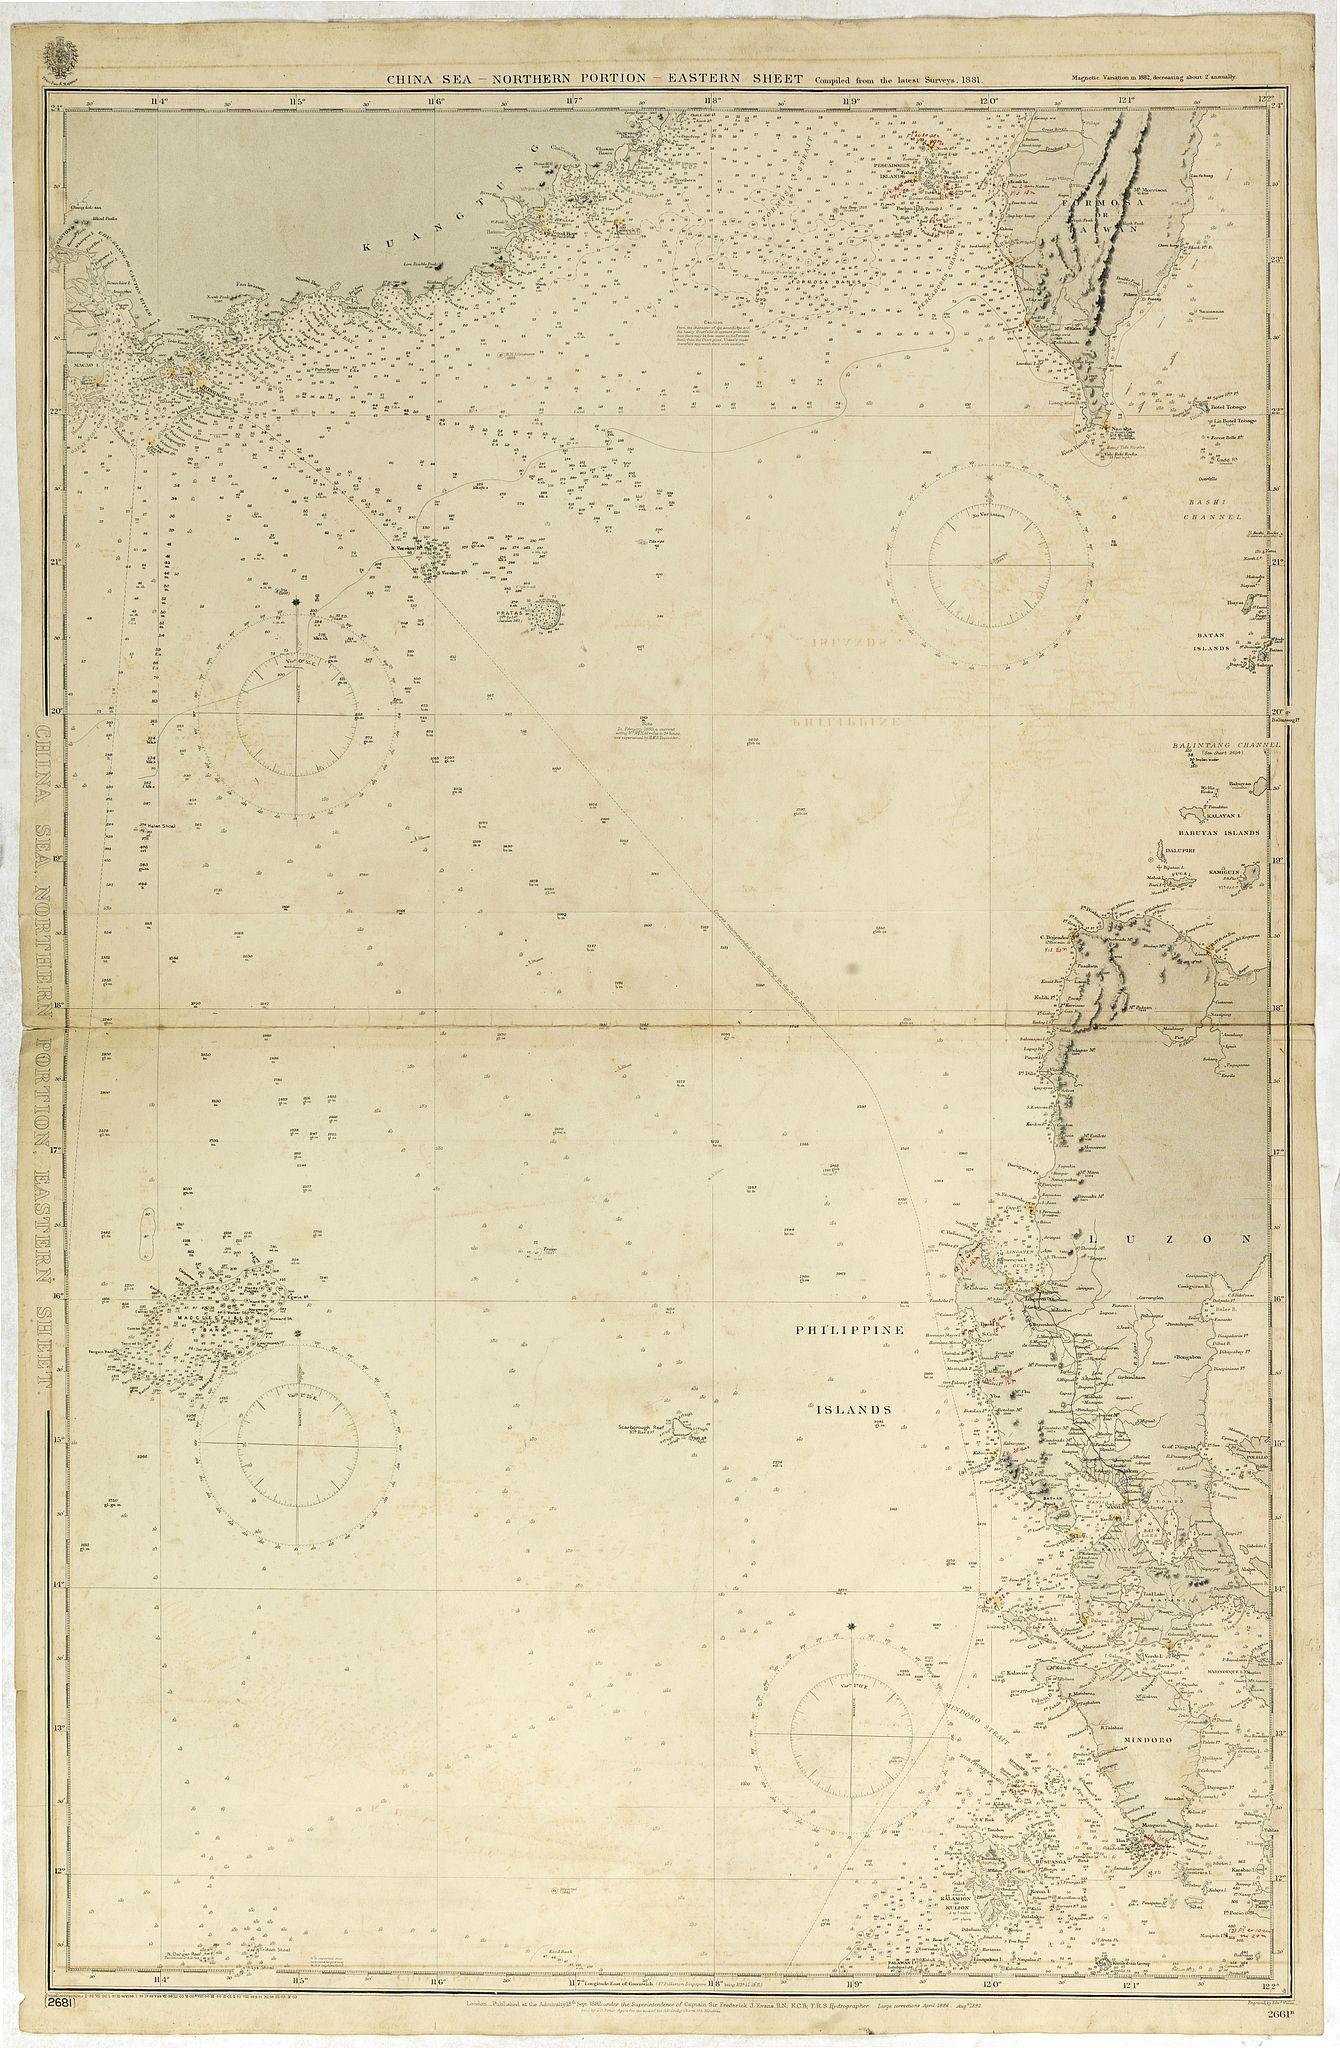 China Sea Northen portion - Eastern sheetCompiled from the latest Surveys 1881